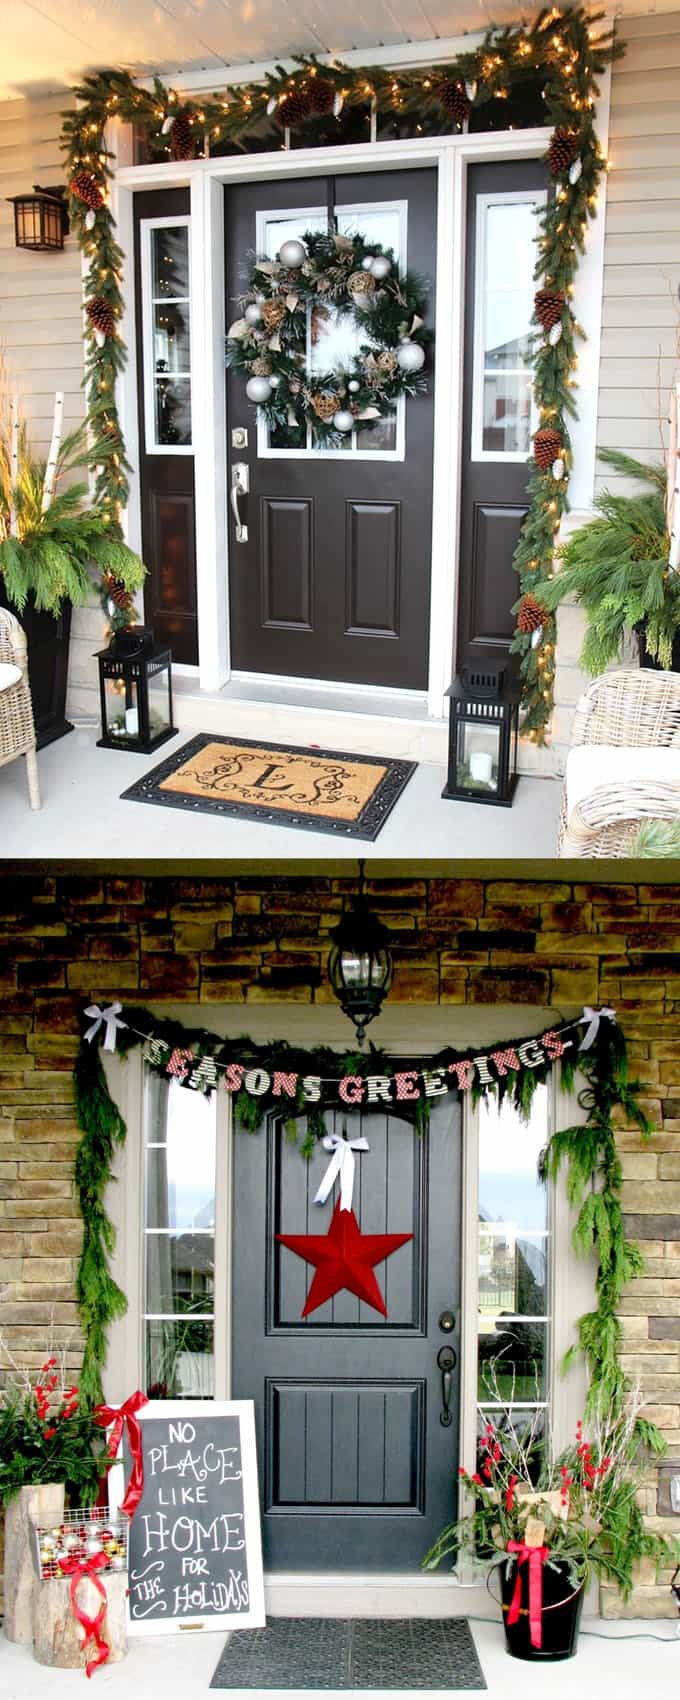 DIY Outdoor Decorating Ideas
 Gorgeous Outdoor Christmas Decorations 32 Best Ideas